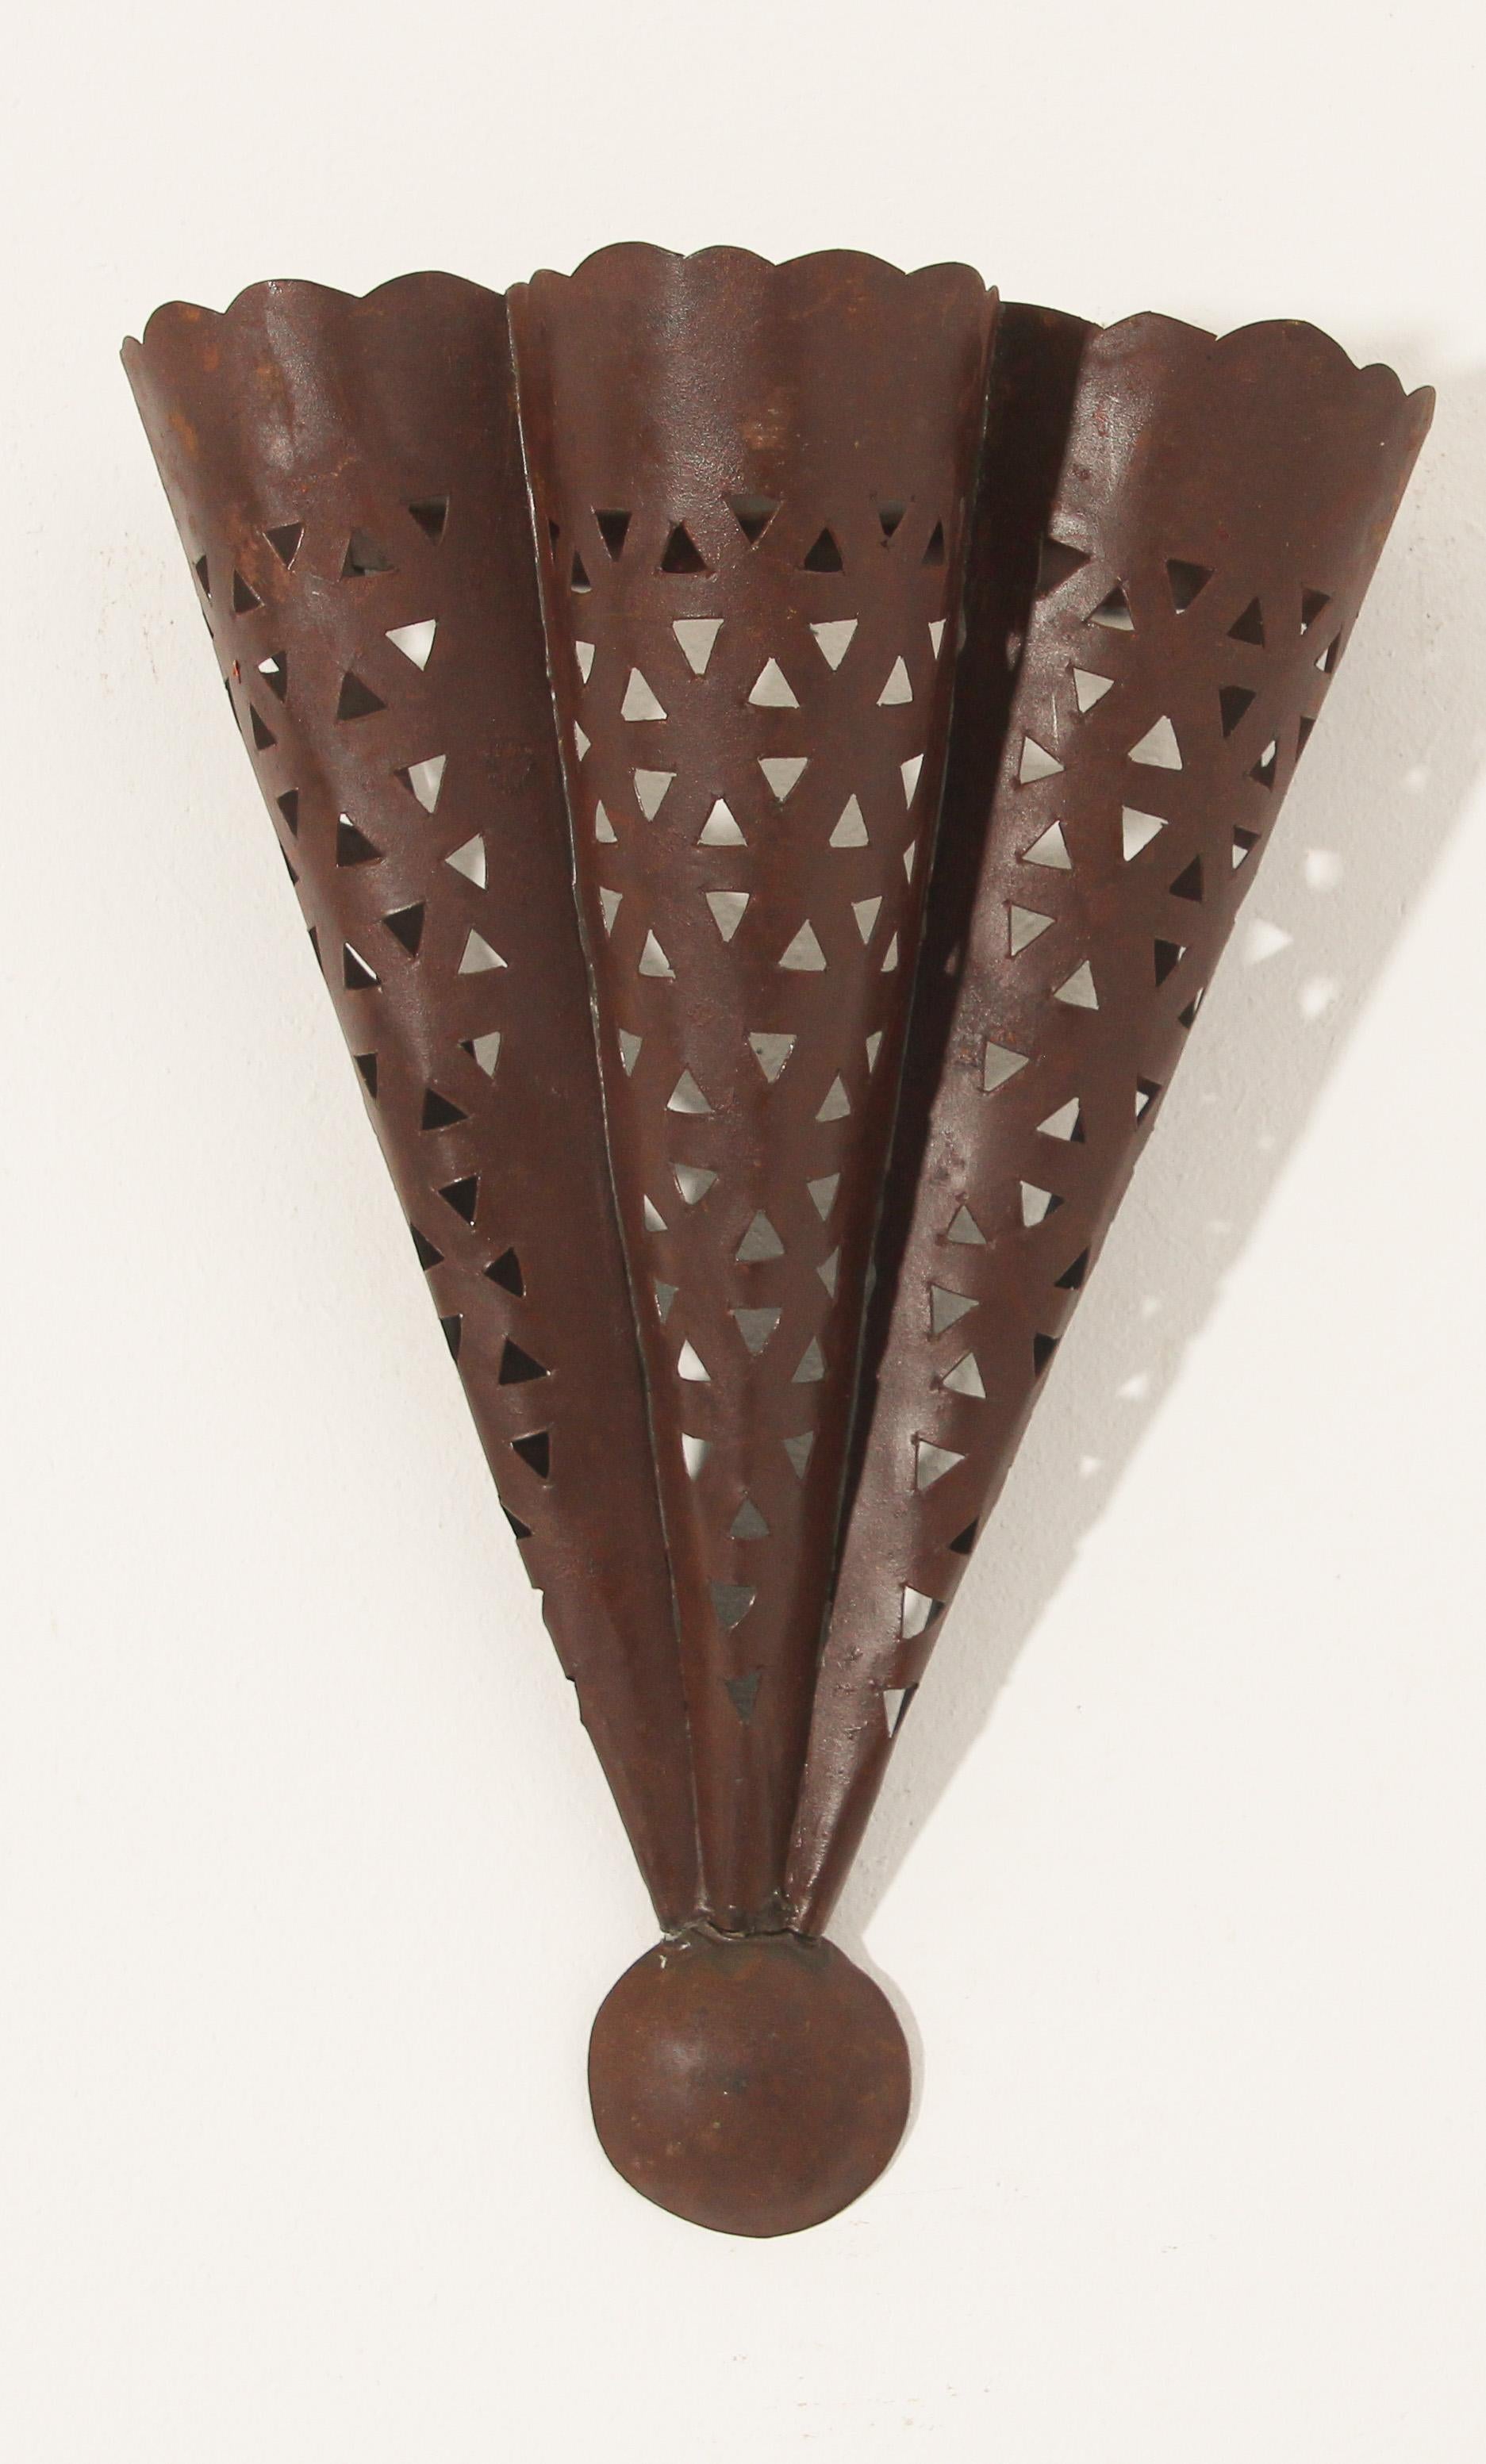 Handcrafted Moroccan Spanish style metal tole sconce shade in cone shape.
Hispano Moresque sconce shade with cutout.
Dark rust finish patina,
For use indoor or outdoor.
Not wired for electricity, shade only.
Multiple available.
Handmade in